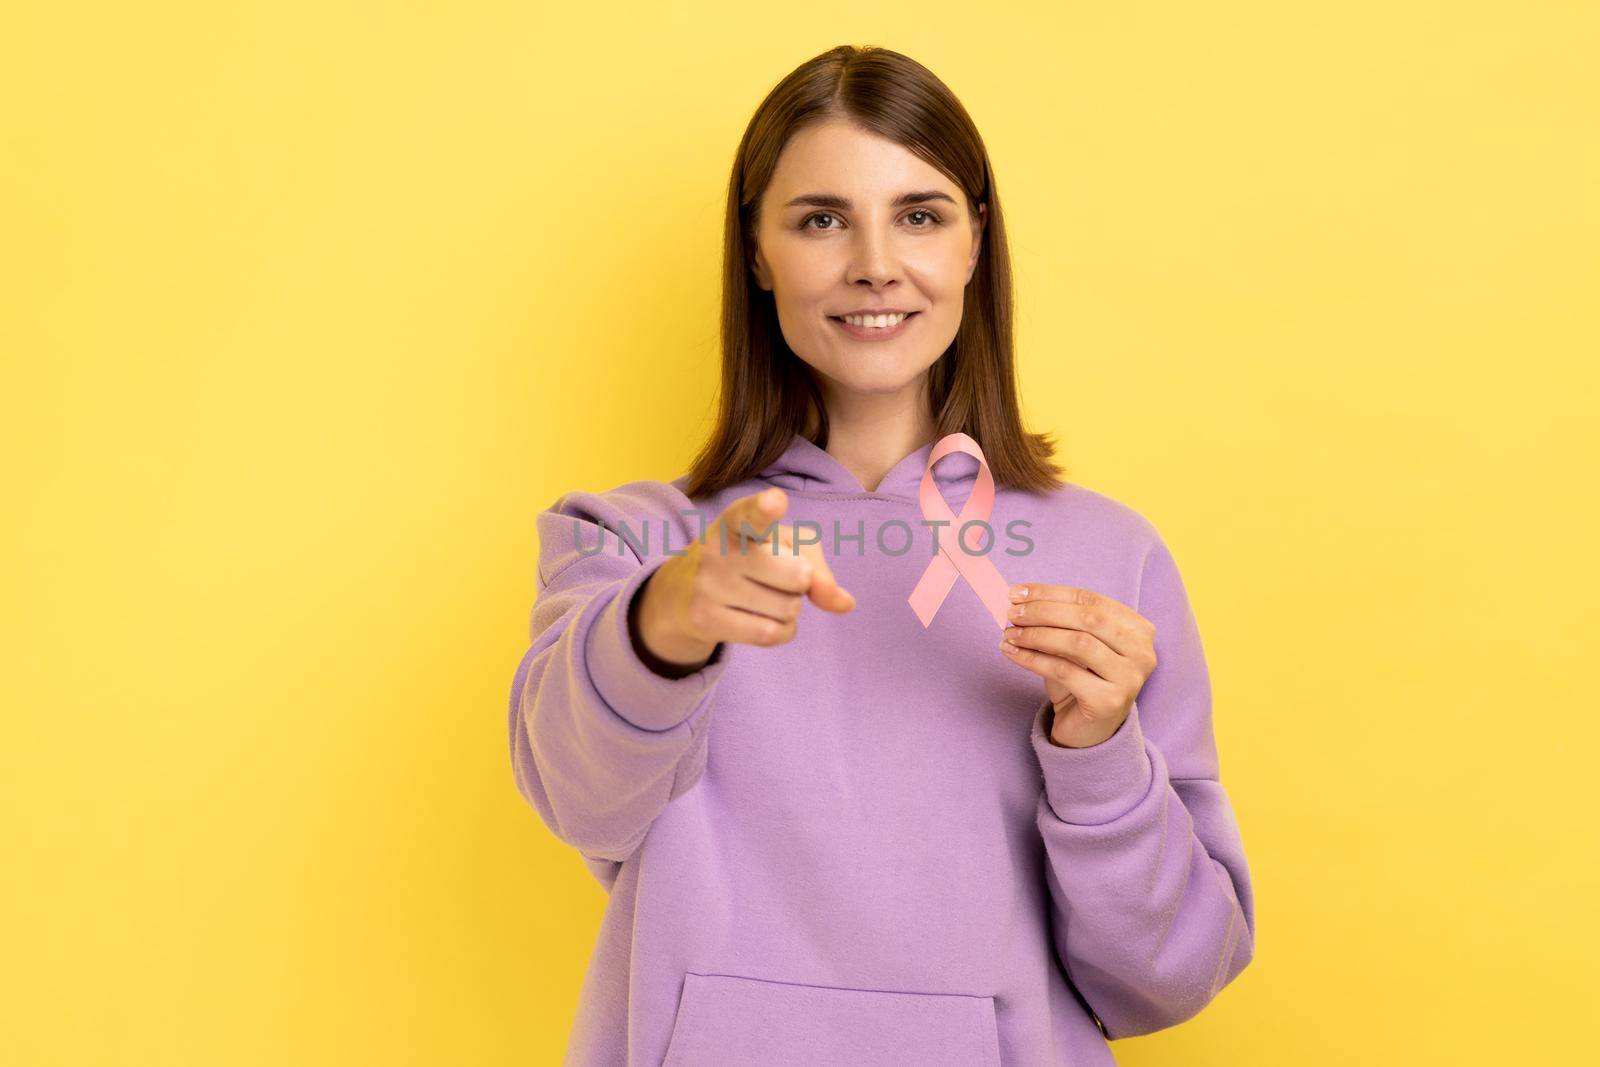 Smiling woman holding pink ribbon near her chest supporting another women, international symbol of breast cancer awareness, pointing to camera. Indoor studio shot isolated on yellow background